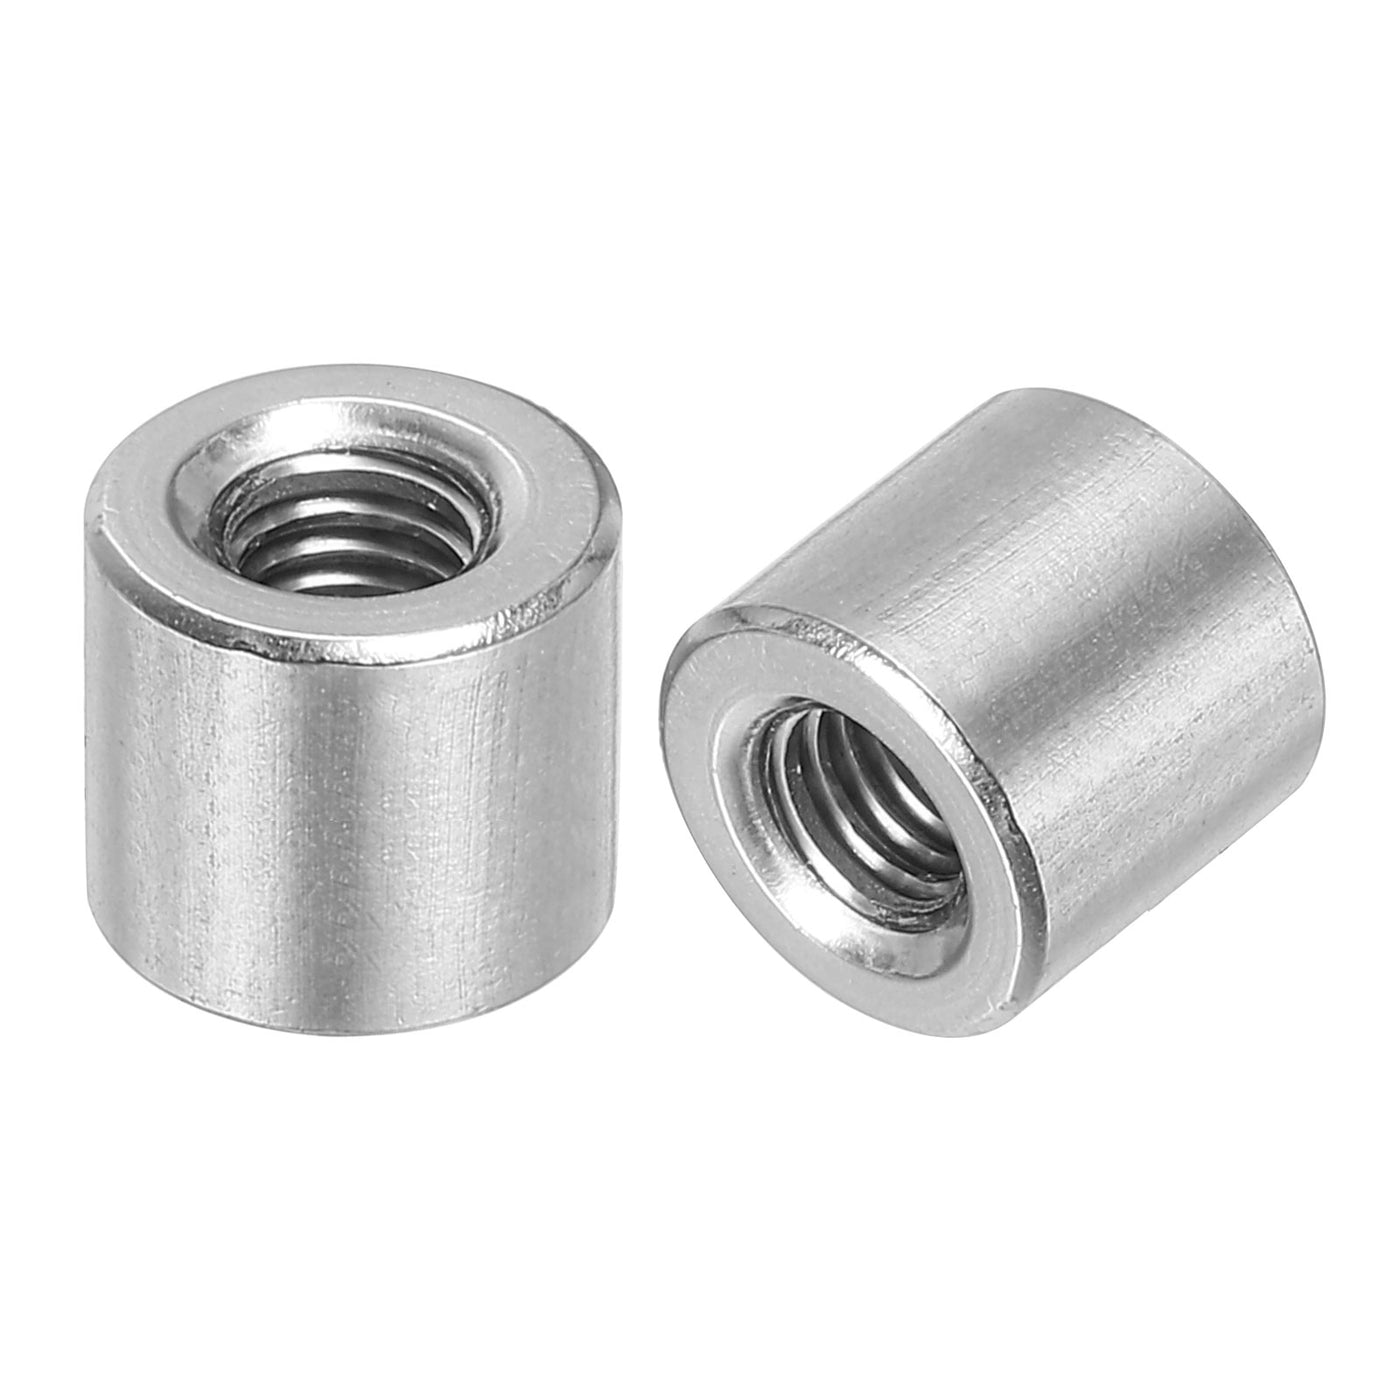 uxcell Uxcell 10Pcs Round Connector Nuts, M6x10x10mm Coupling Nut Sleeve Rod Bar Stud Nut